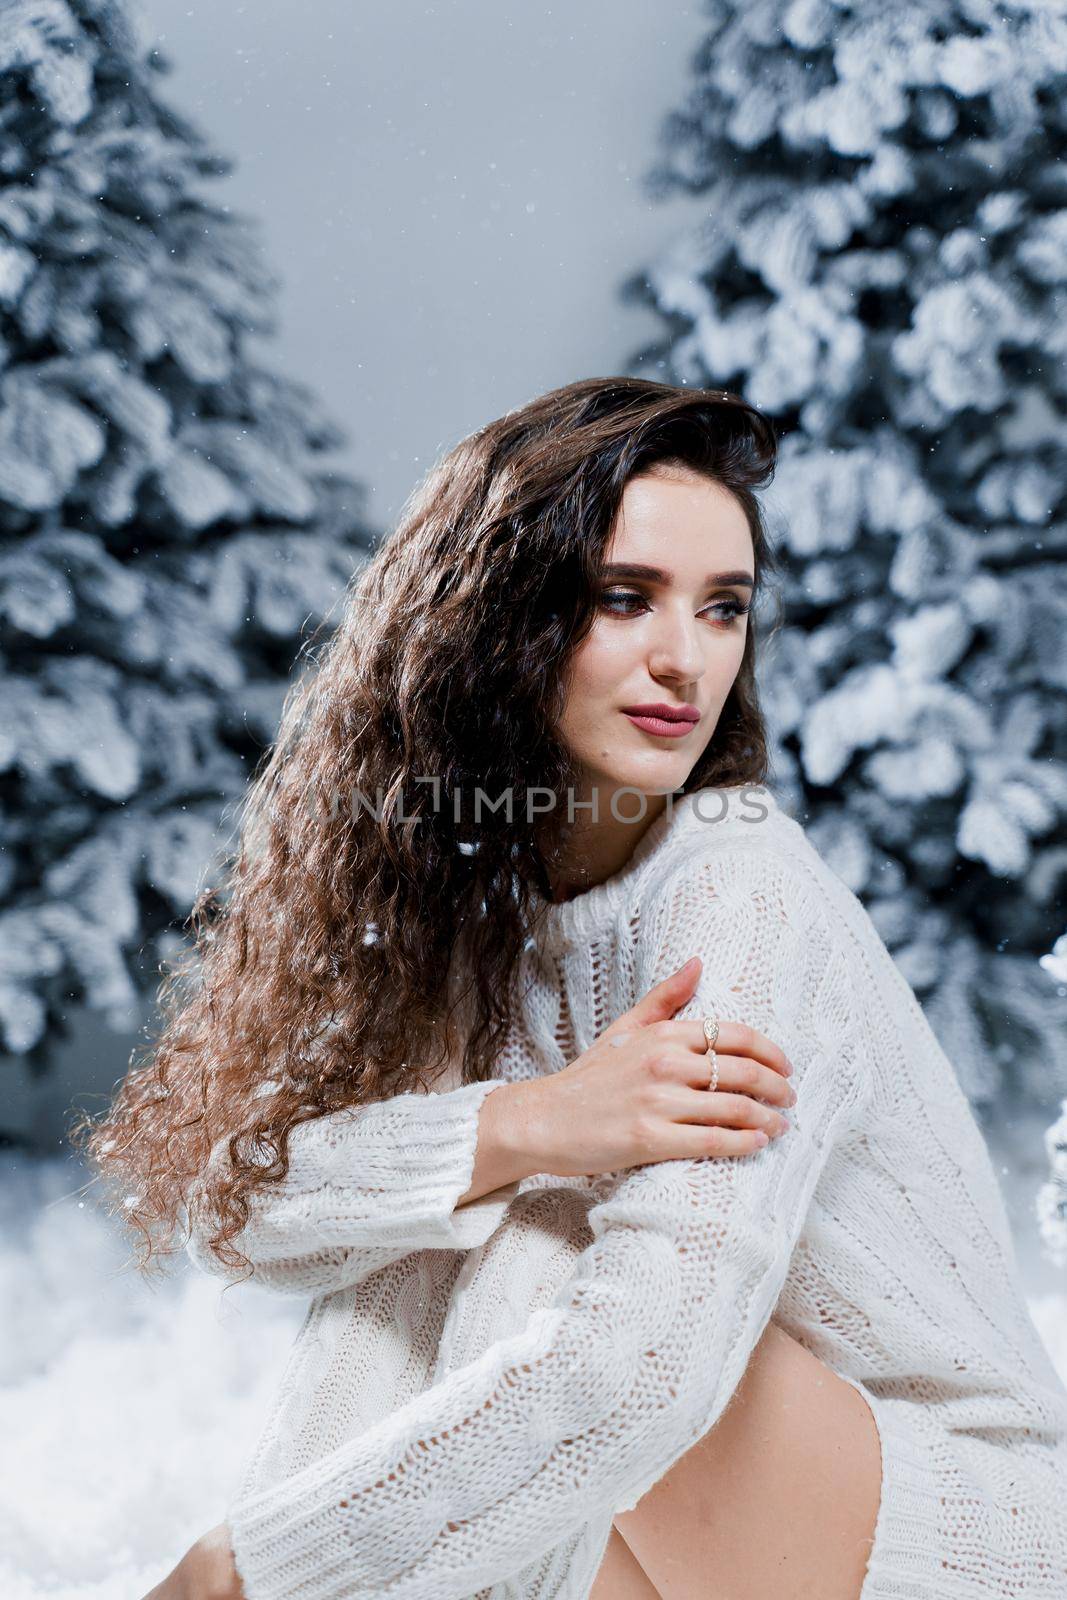 Attractive girl in a warm white sweater and white socks near snowy trees before the new year. Christmas holiday by Rabizo